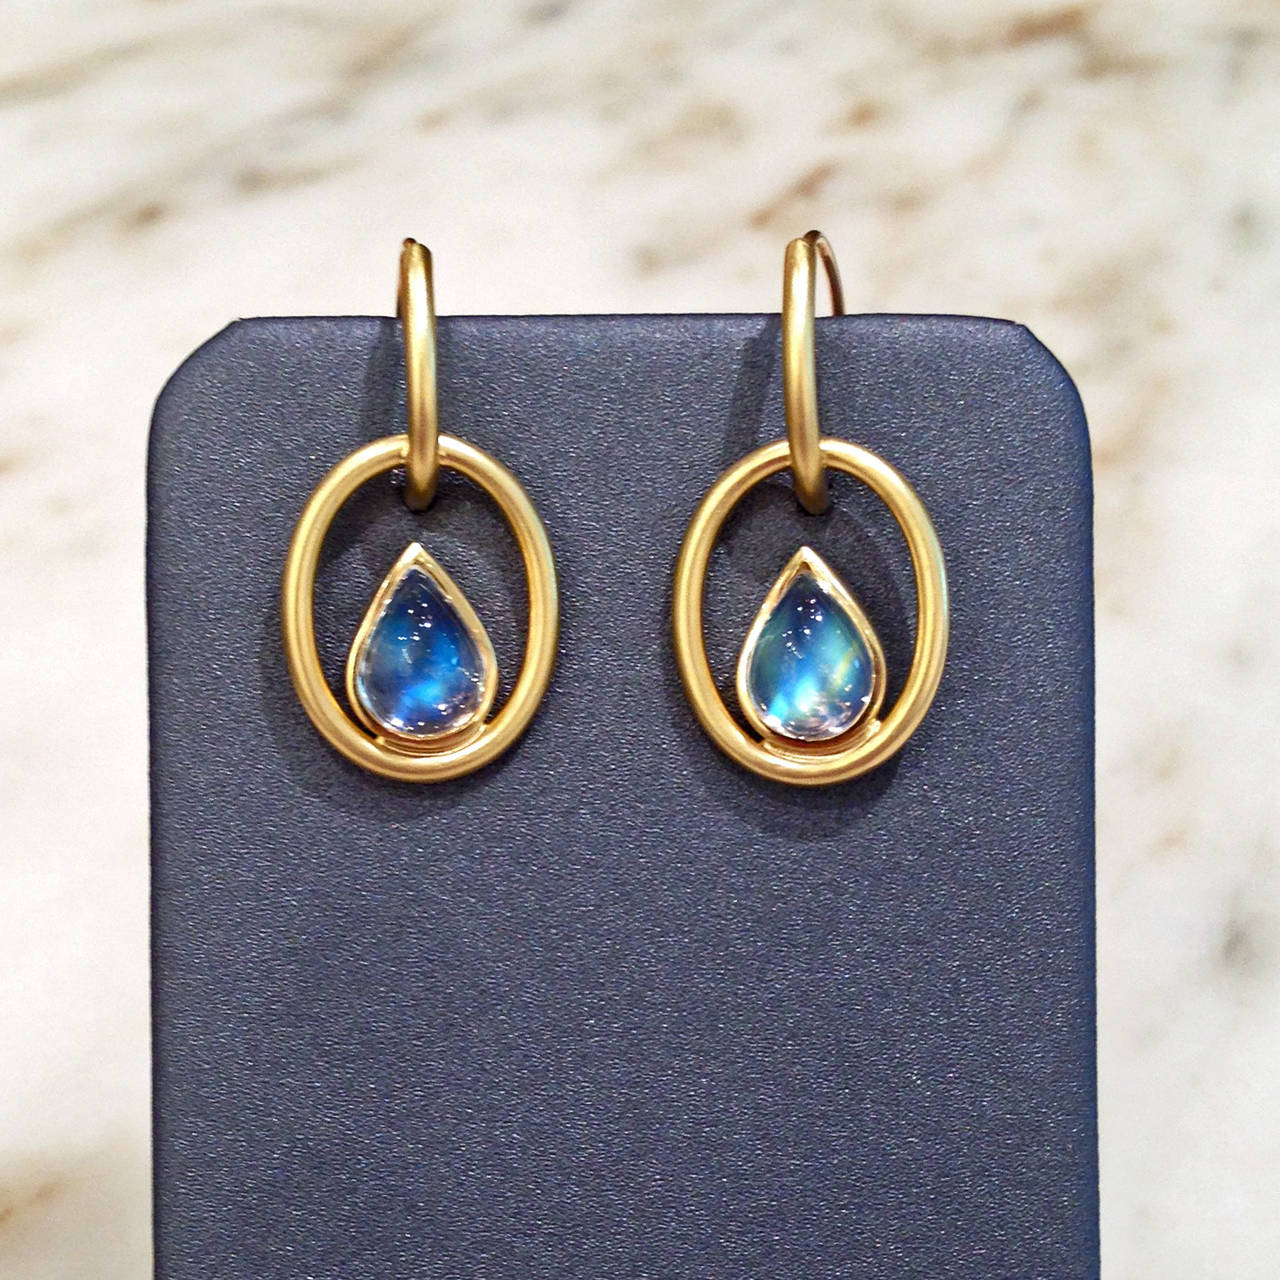 One-of-a-Kind Interlink Earrings handcrafted in 18.5k yellow gold with 3.50 carats of cabochon-cut pear-shaped blue moonstone and 18.5k yellow gold hook backs. 

About the Artist: Susan Sadler has studied design for most of her life, and